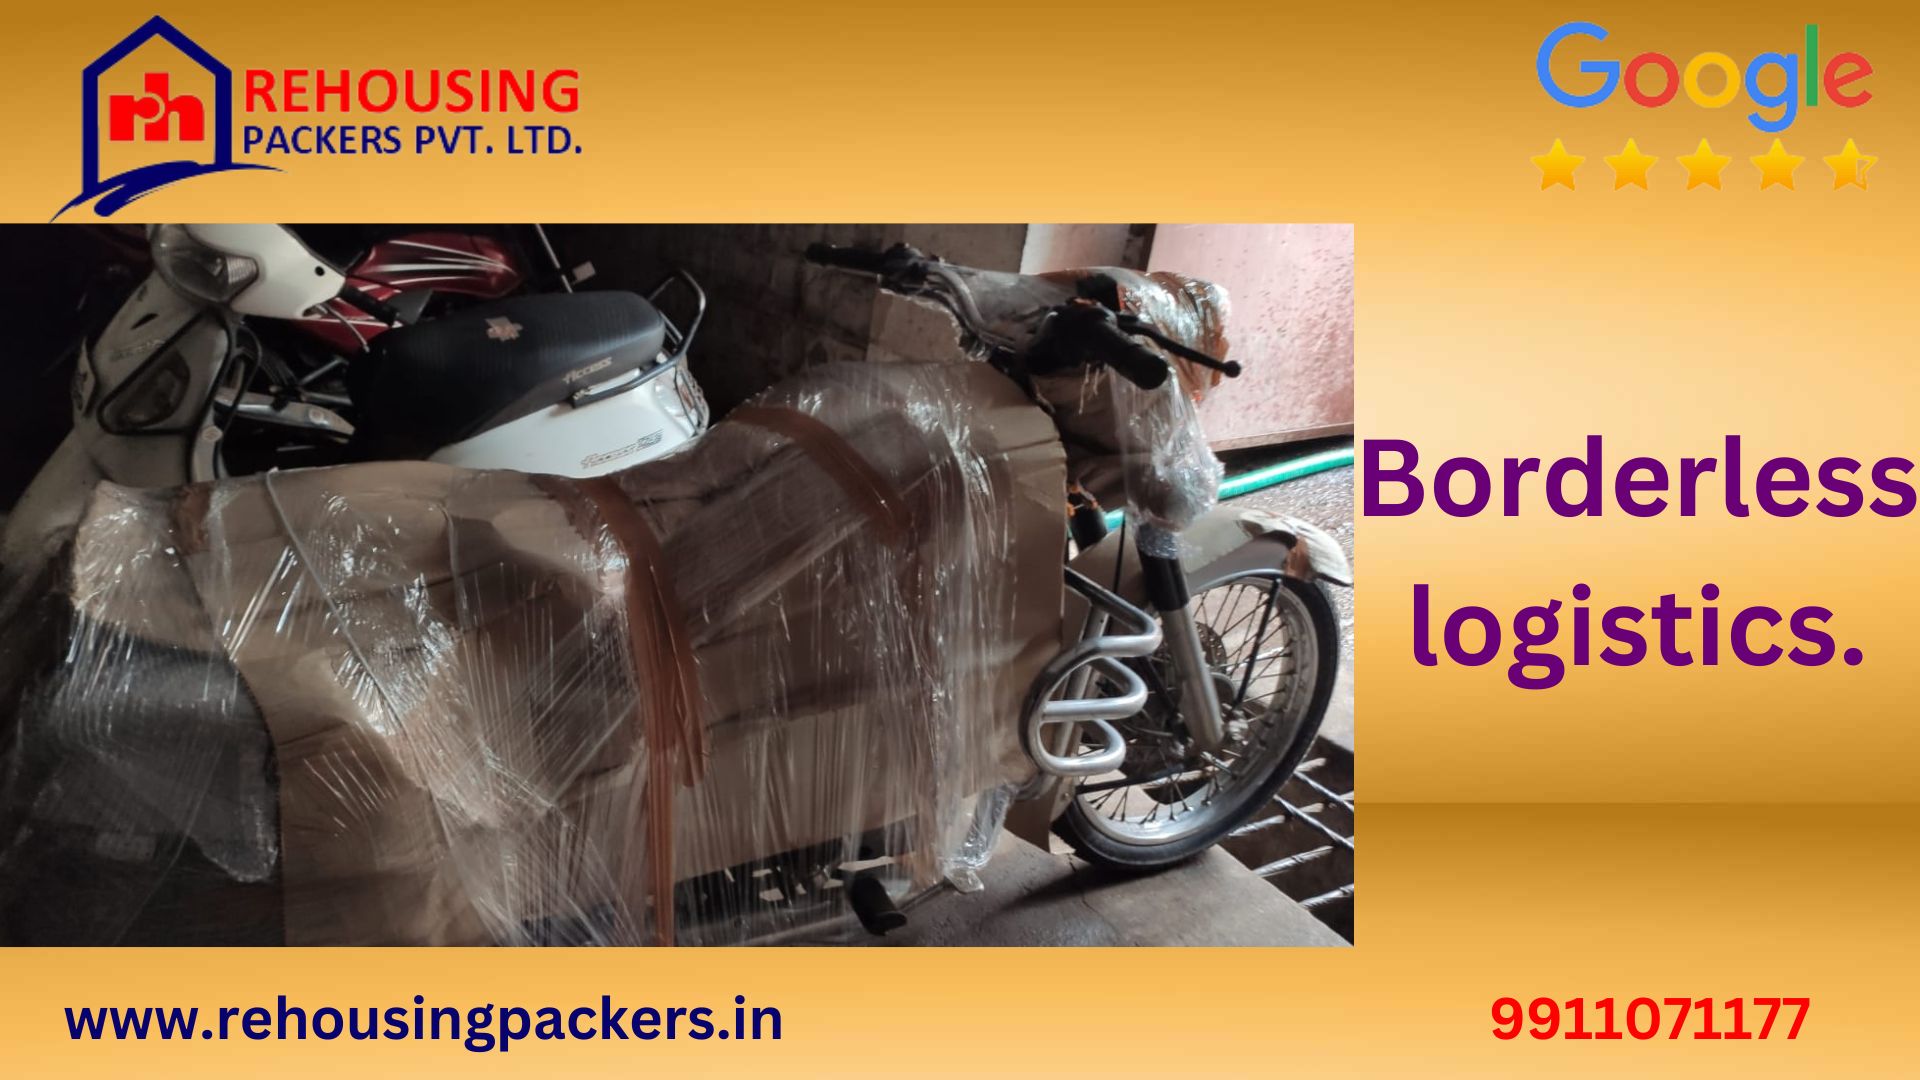 Our Expertise bike transportation services in Mumbai